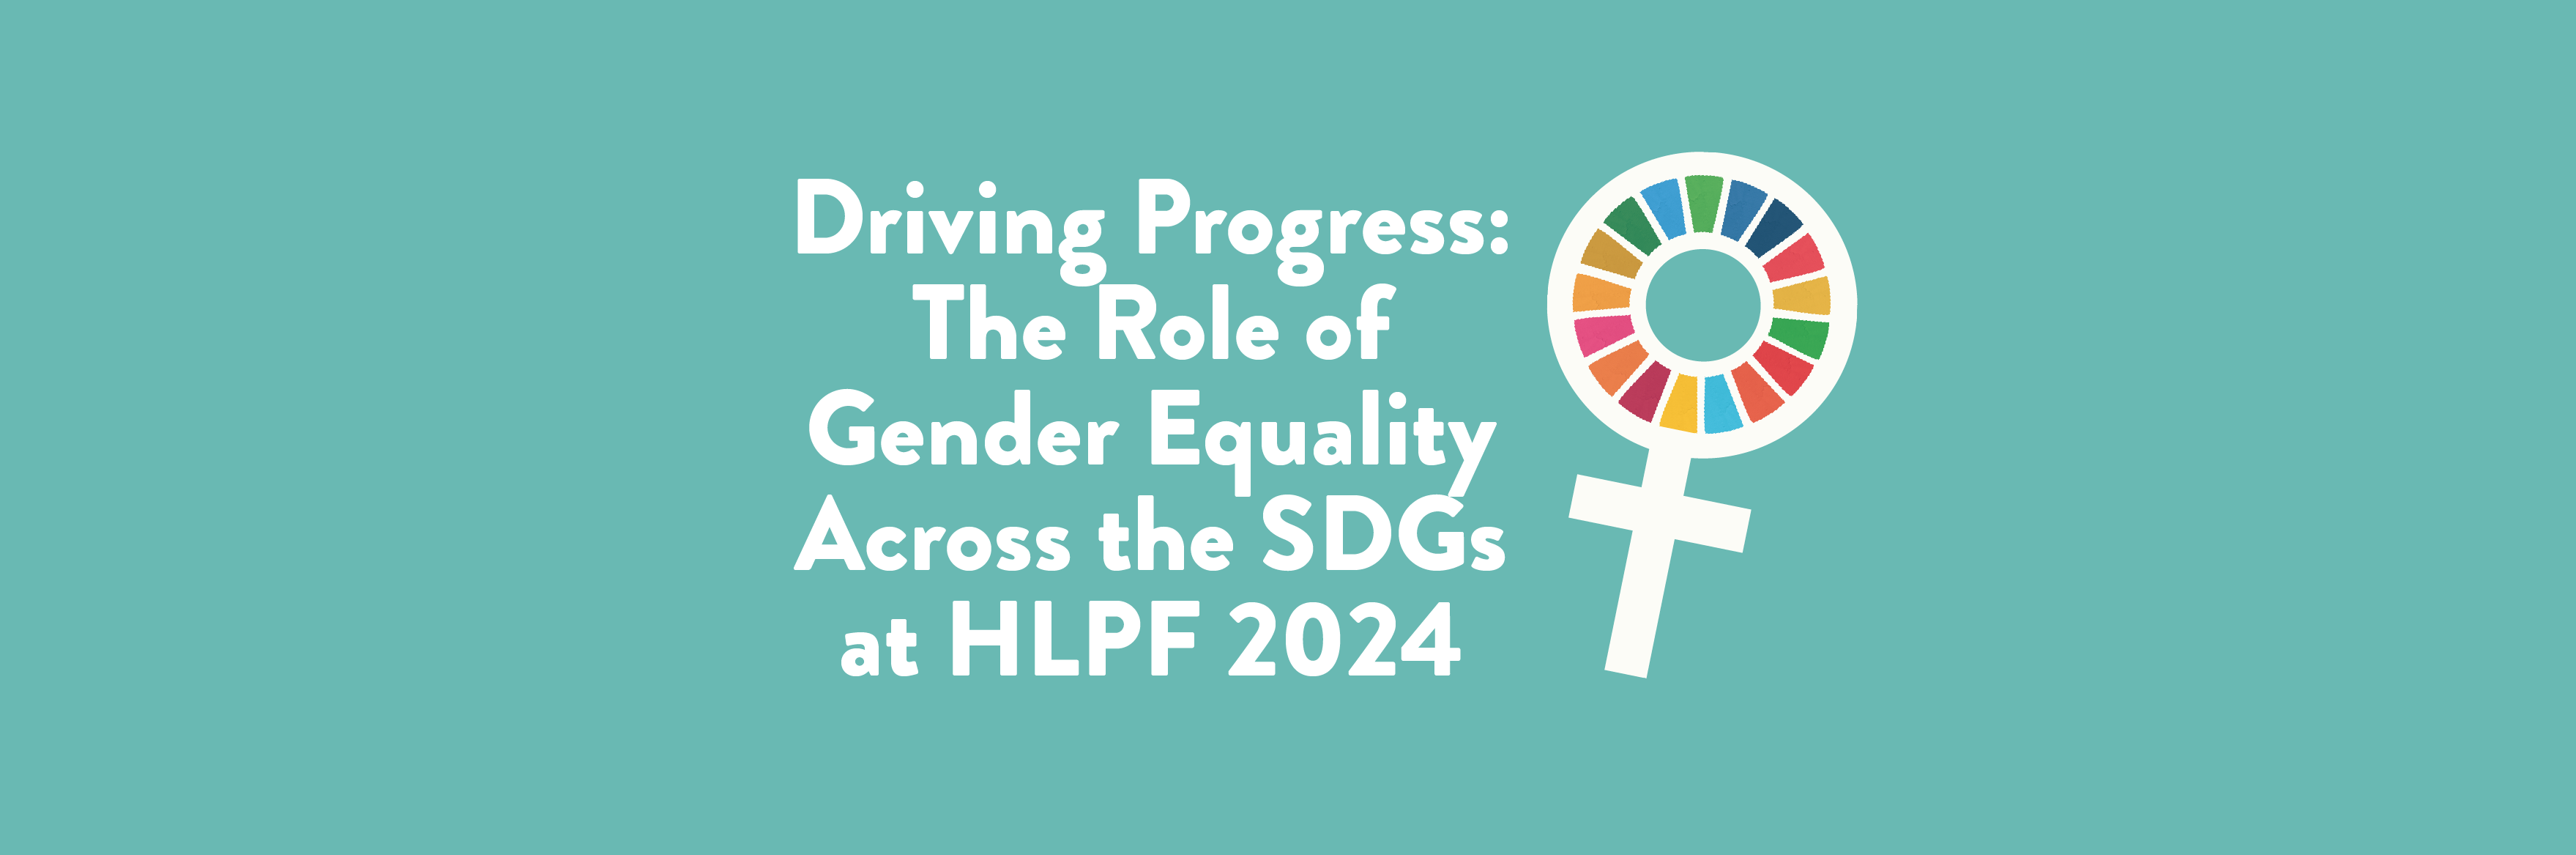 Driving Progress: The Role of Gender Equality Across the SDGs at HLPF 2024